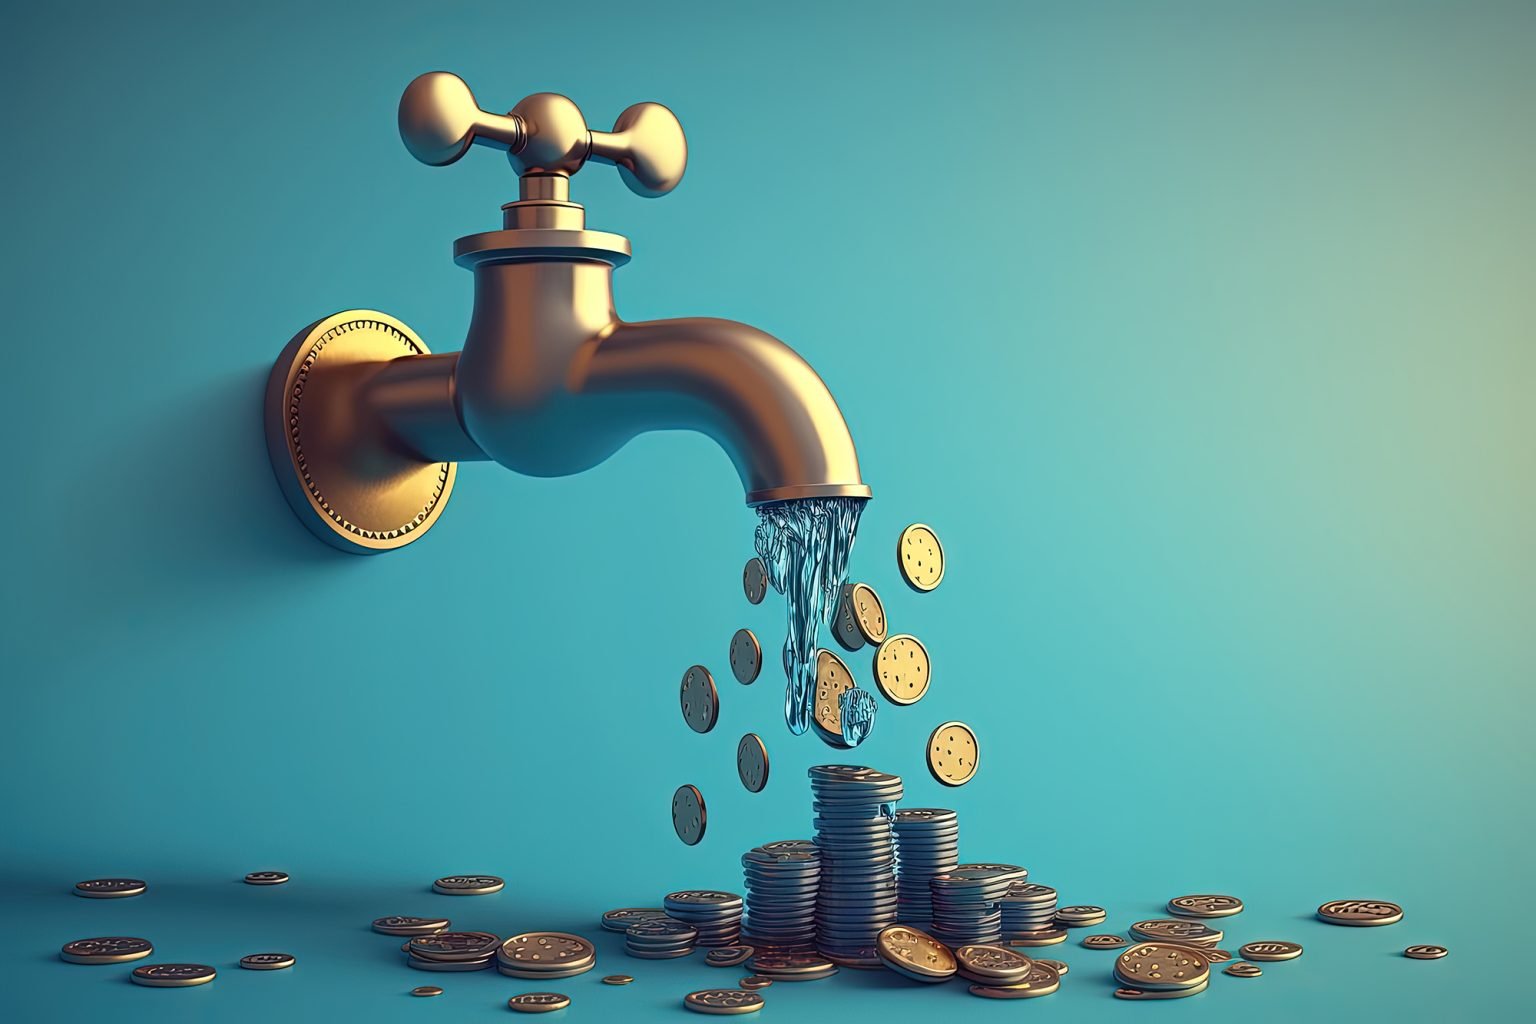 money falling from faucet, blue background